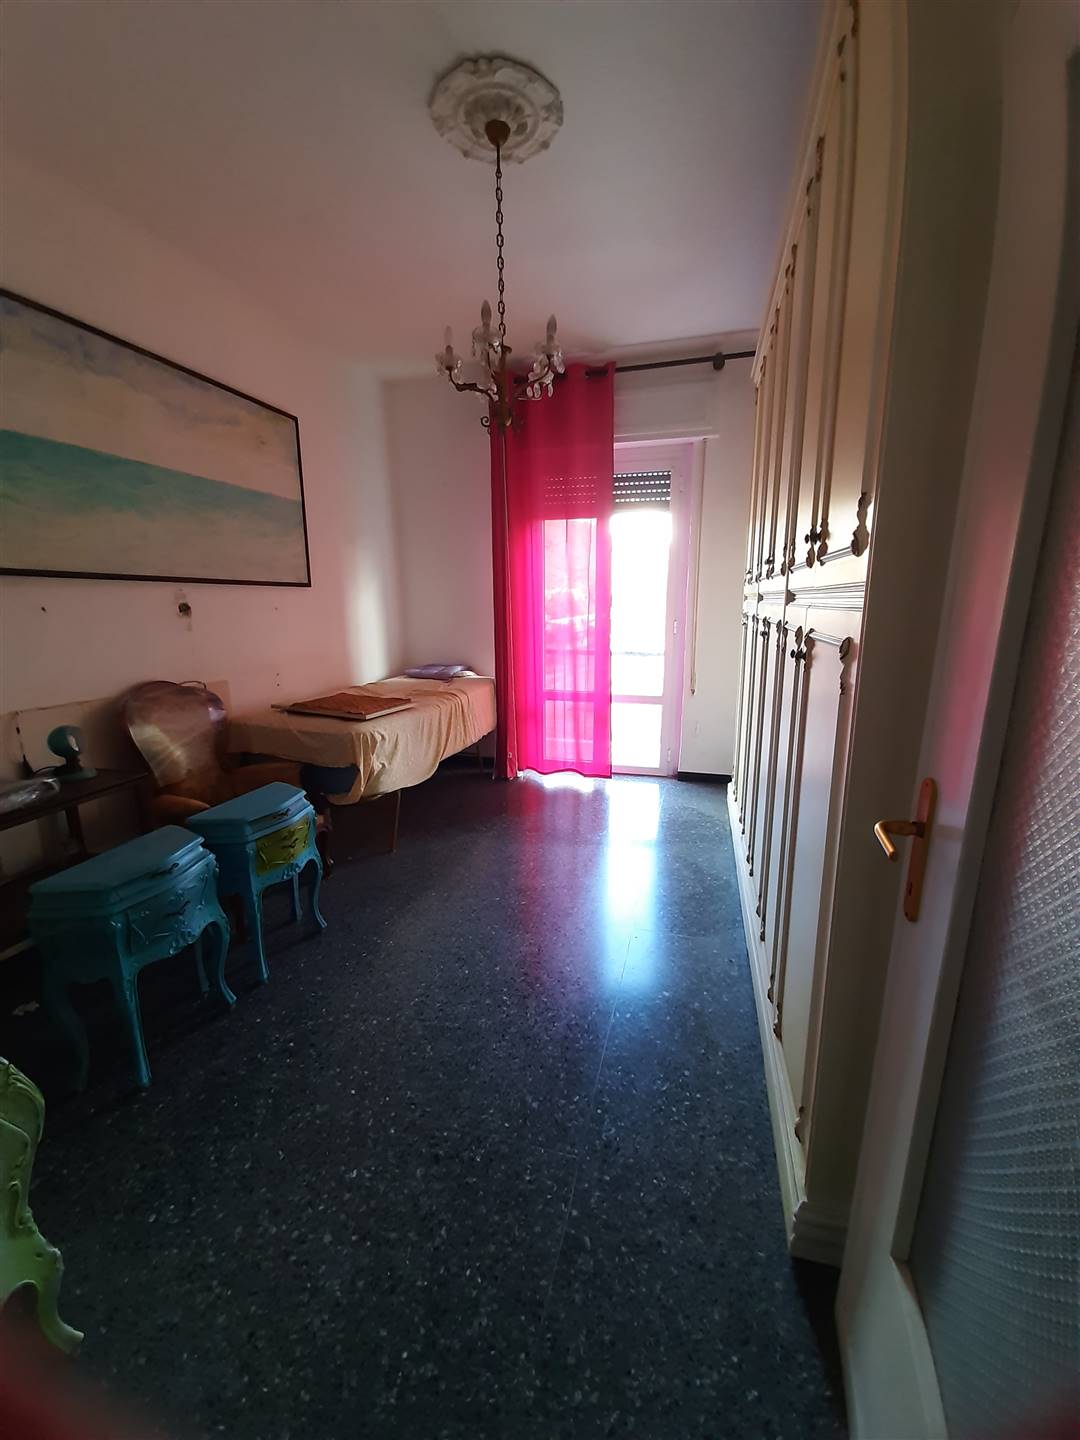 FERRANIA, CAIRO MONTENOTTE, Apartment for sale of 77 Sq. mt., Habitable, Heating Individual heating system, Energetic class: F, placed at 2° on 5, 